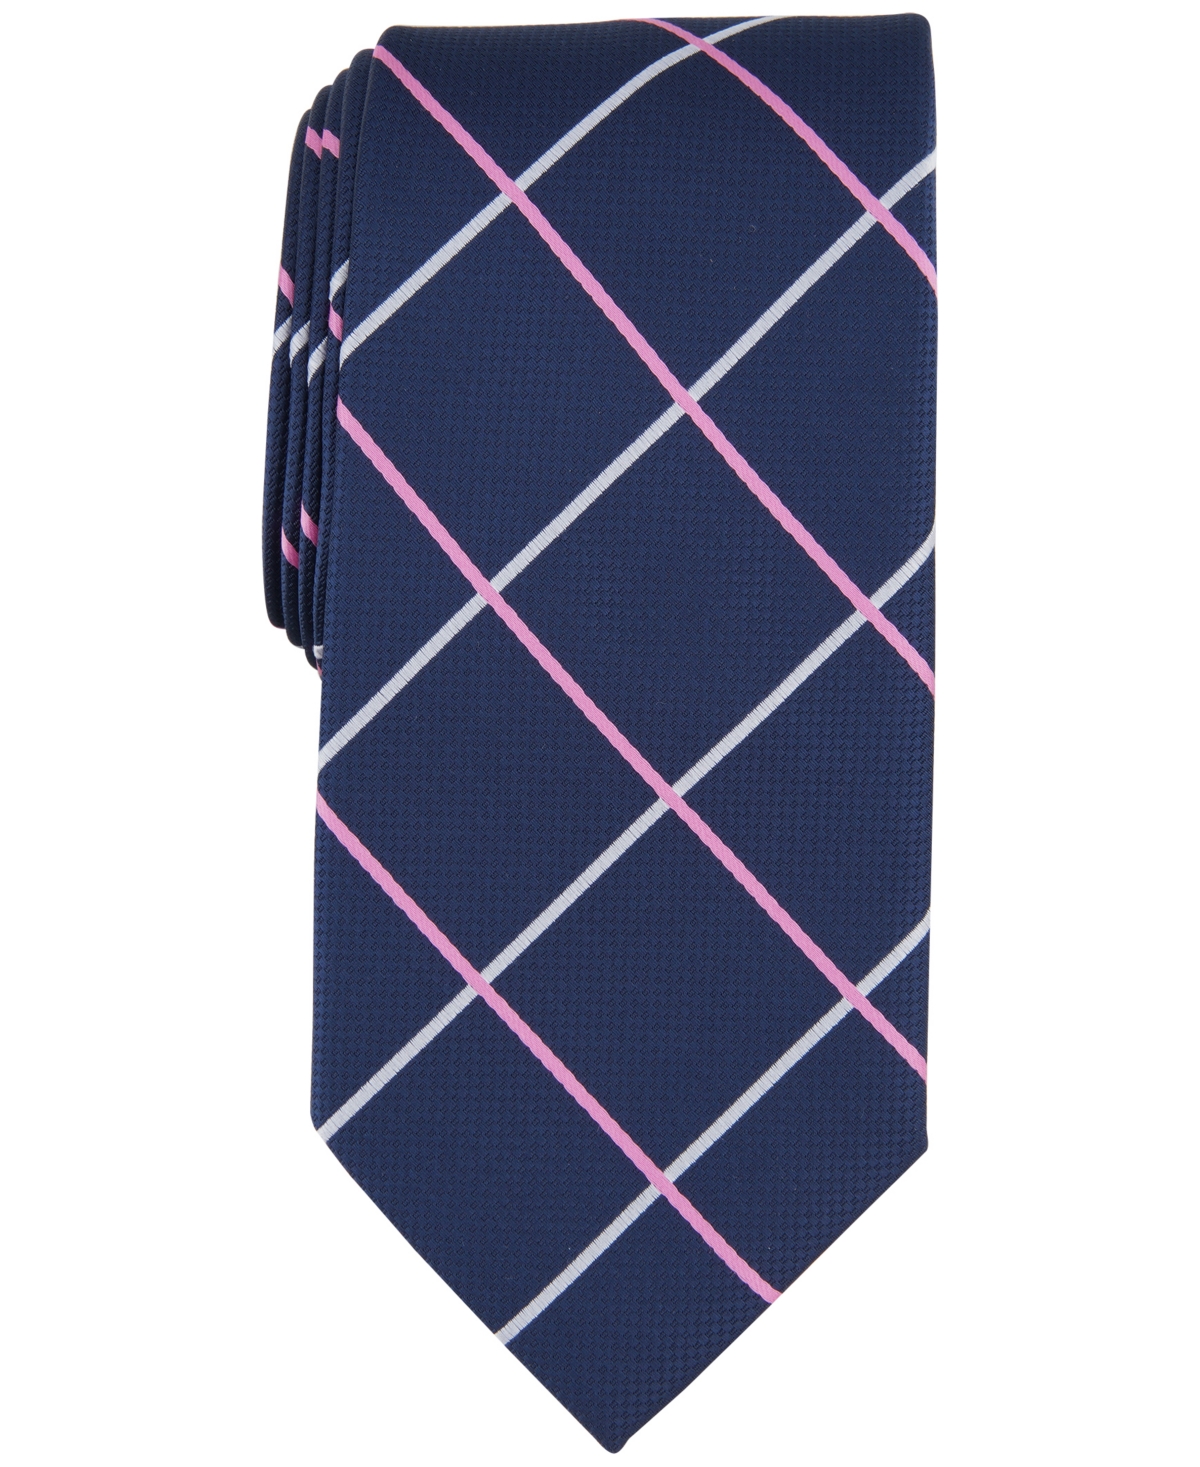 Men's Rodick Grid Tie, Created for Macy's - Pink